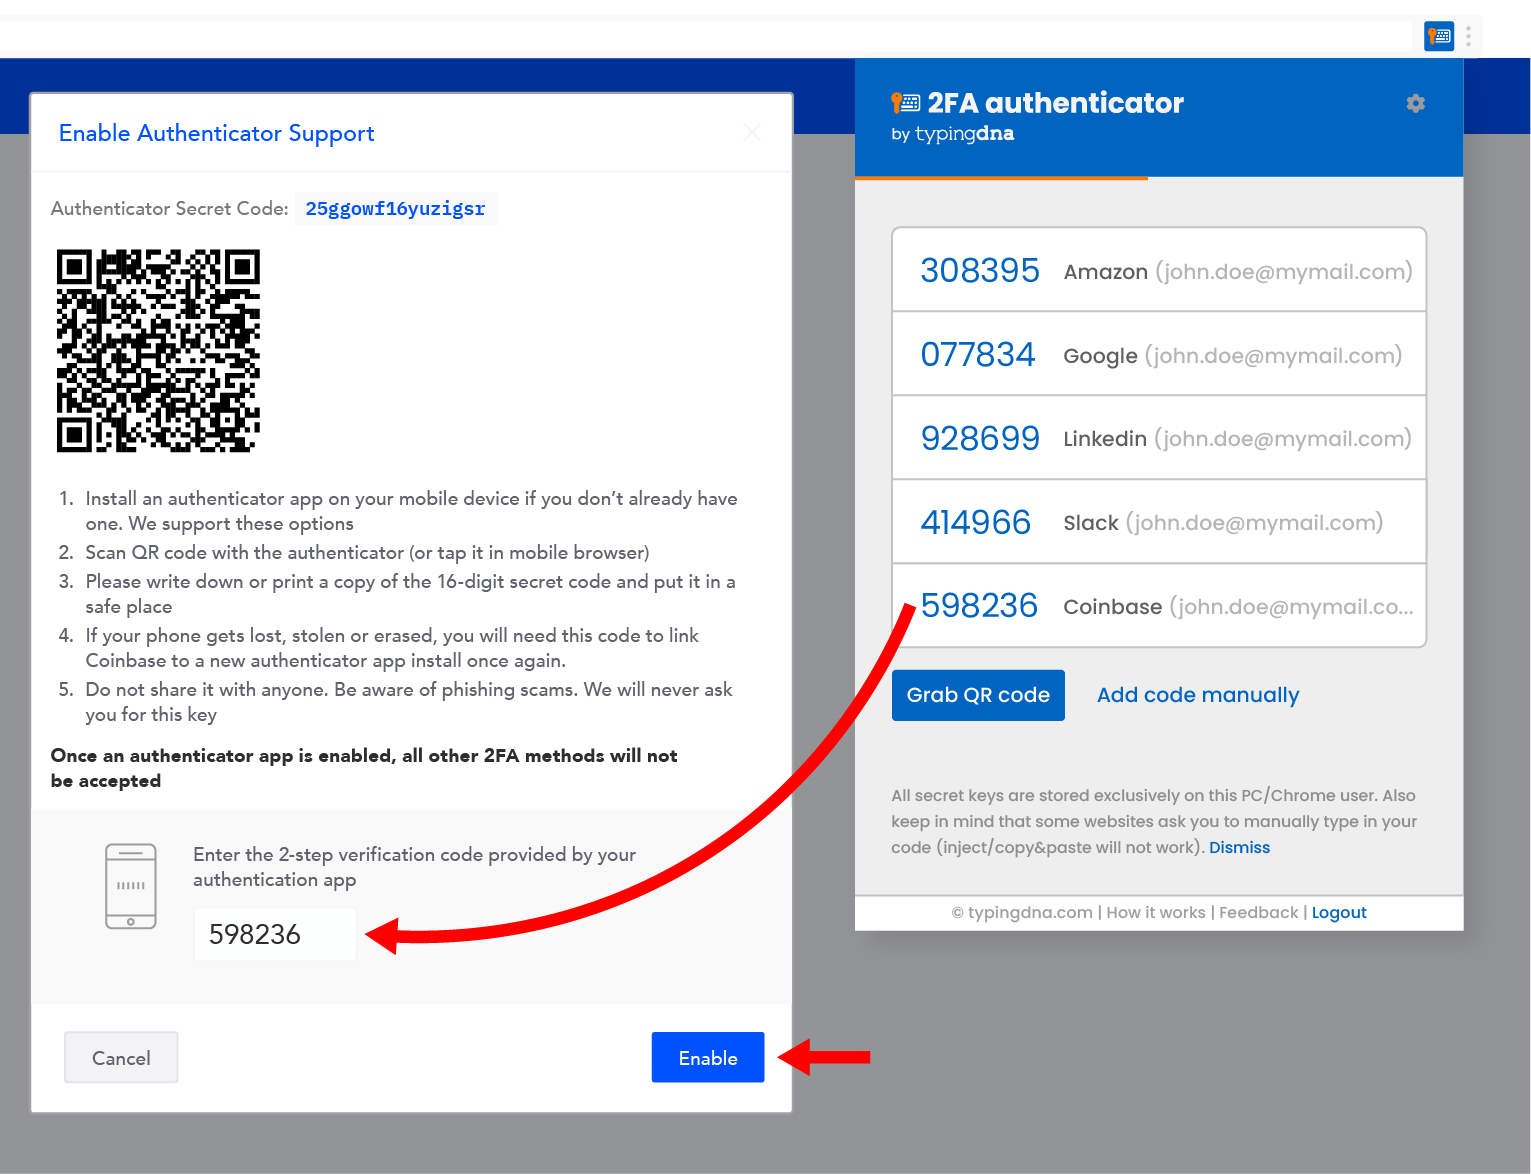 getting authenticator to work again with coinbase - Google Account Community